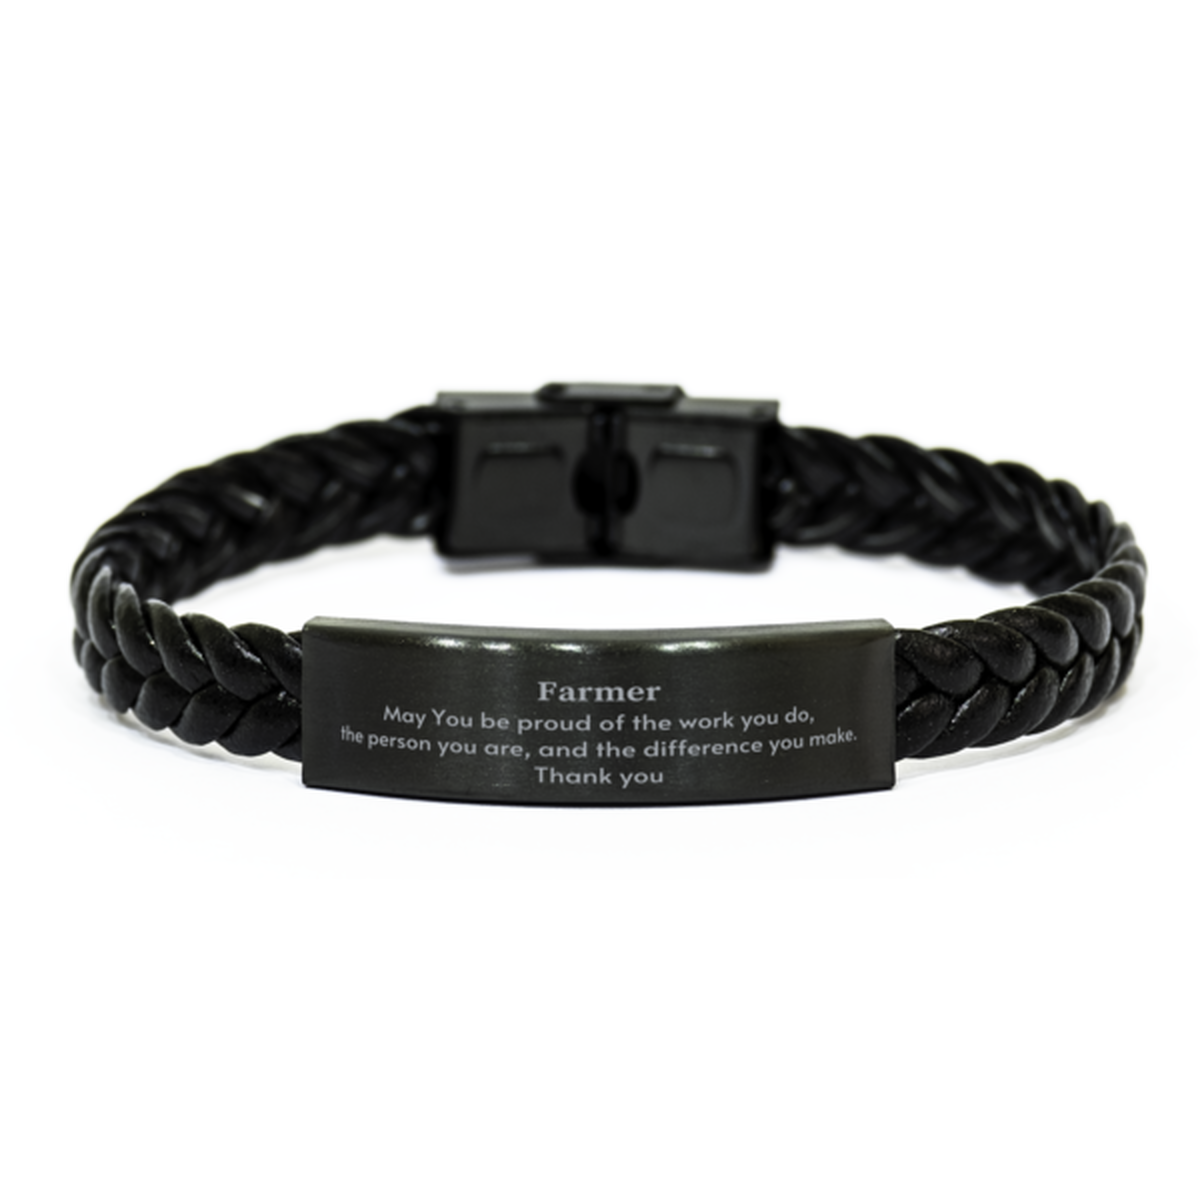 Heartwarming Braided Leather Bracelet Retirement Coworkers Gifts for Farmer, Farmer May You be proud of the work you do, the person you are Gifts for Boss Men Women Friends